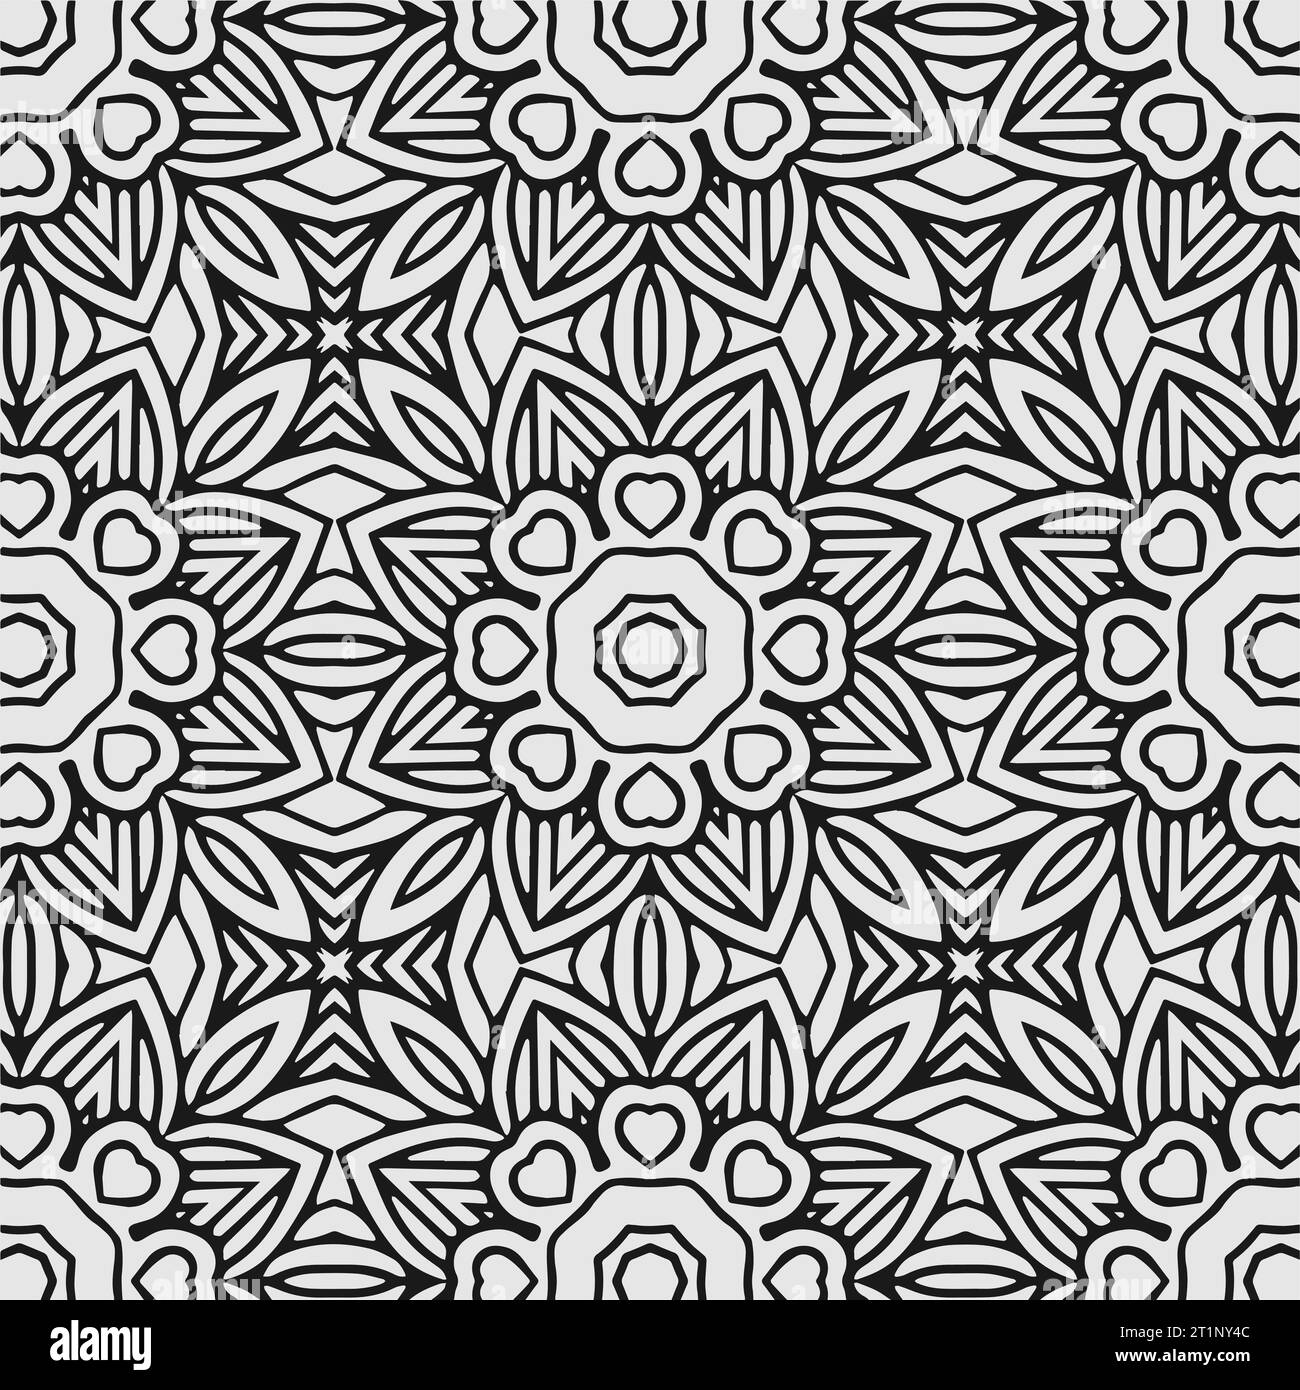 vector coloring texture background pattern design Stock Vector